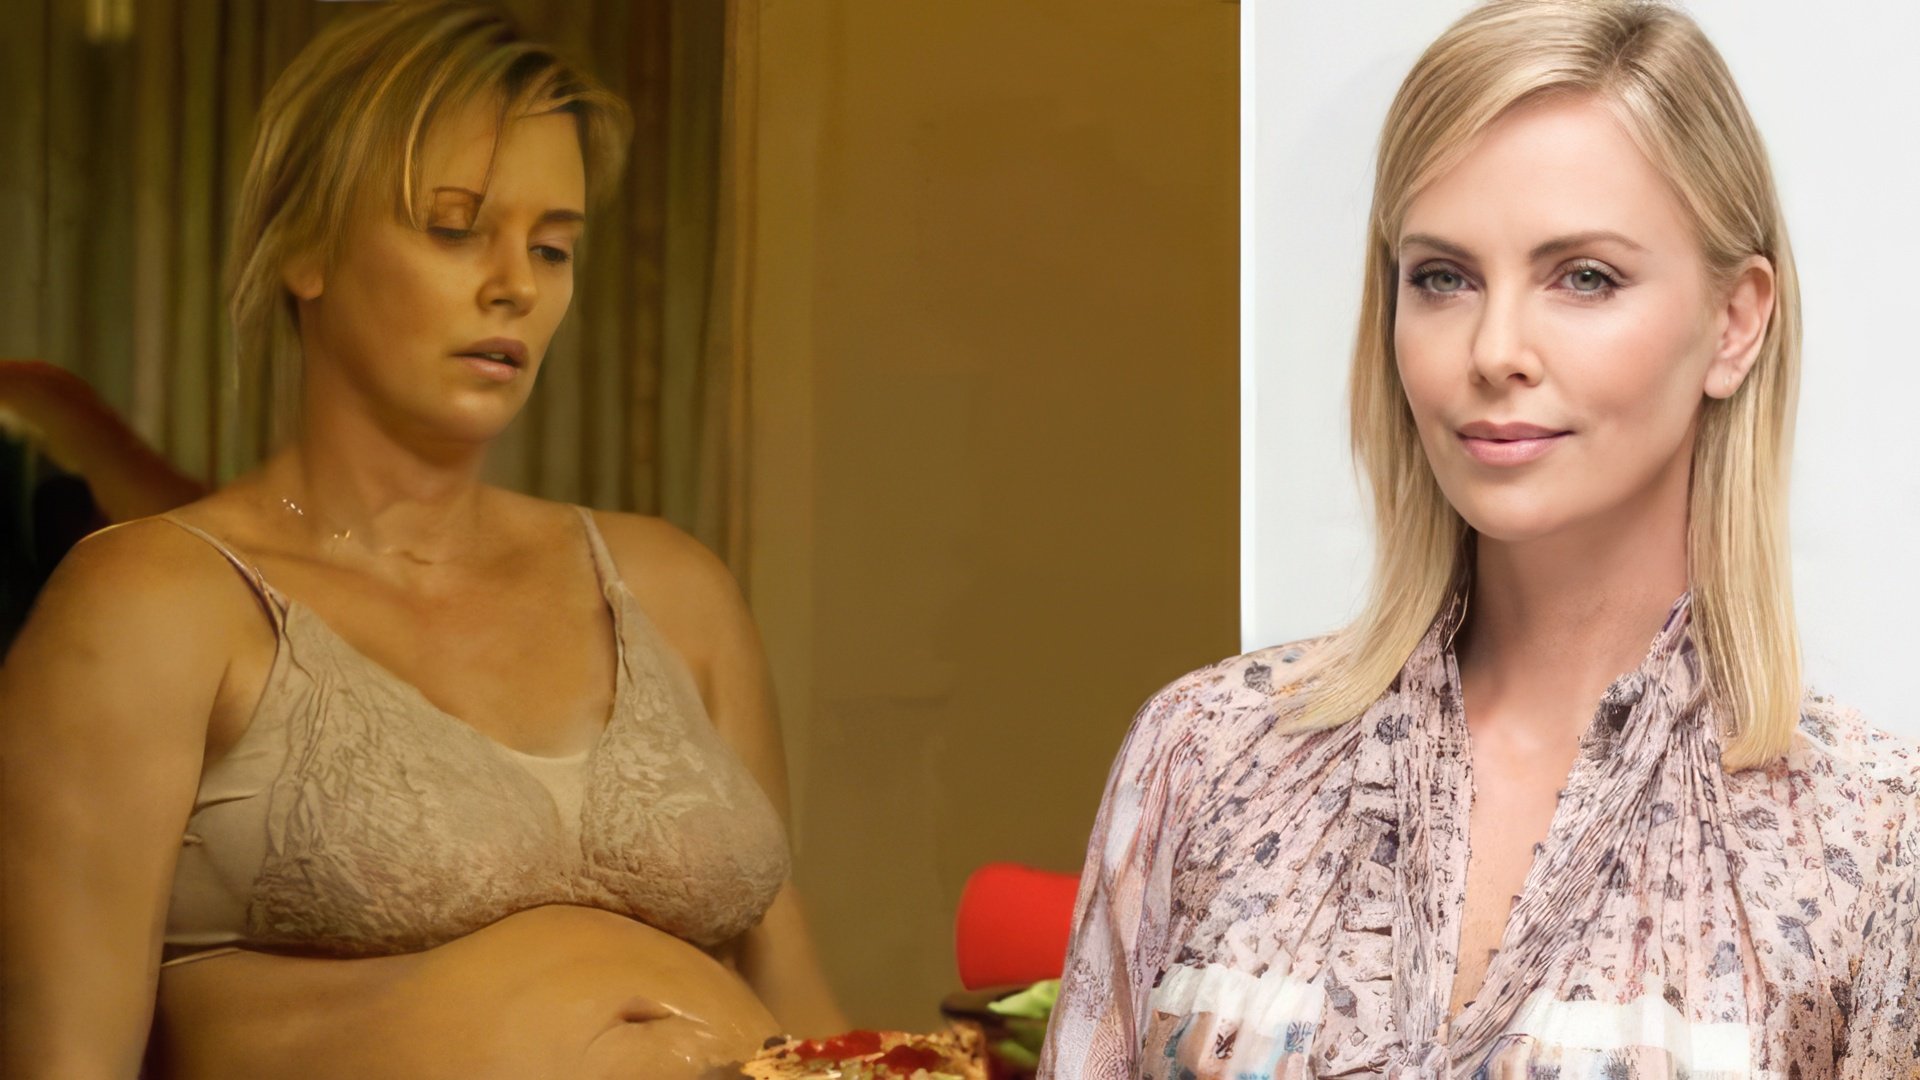 To shoot in 'Tully,' Charlize Theron had to gain weight